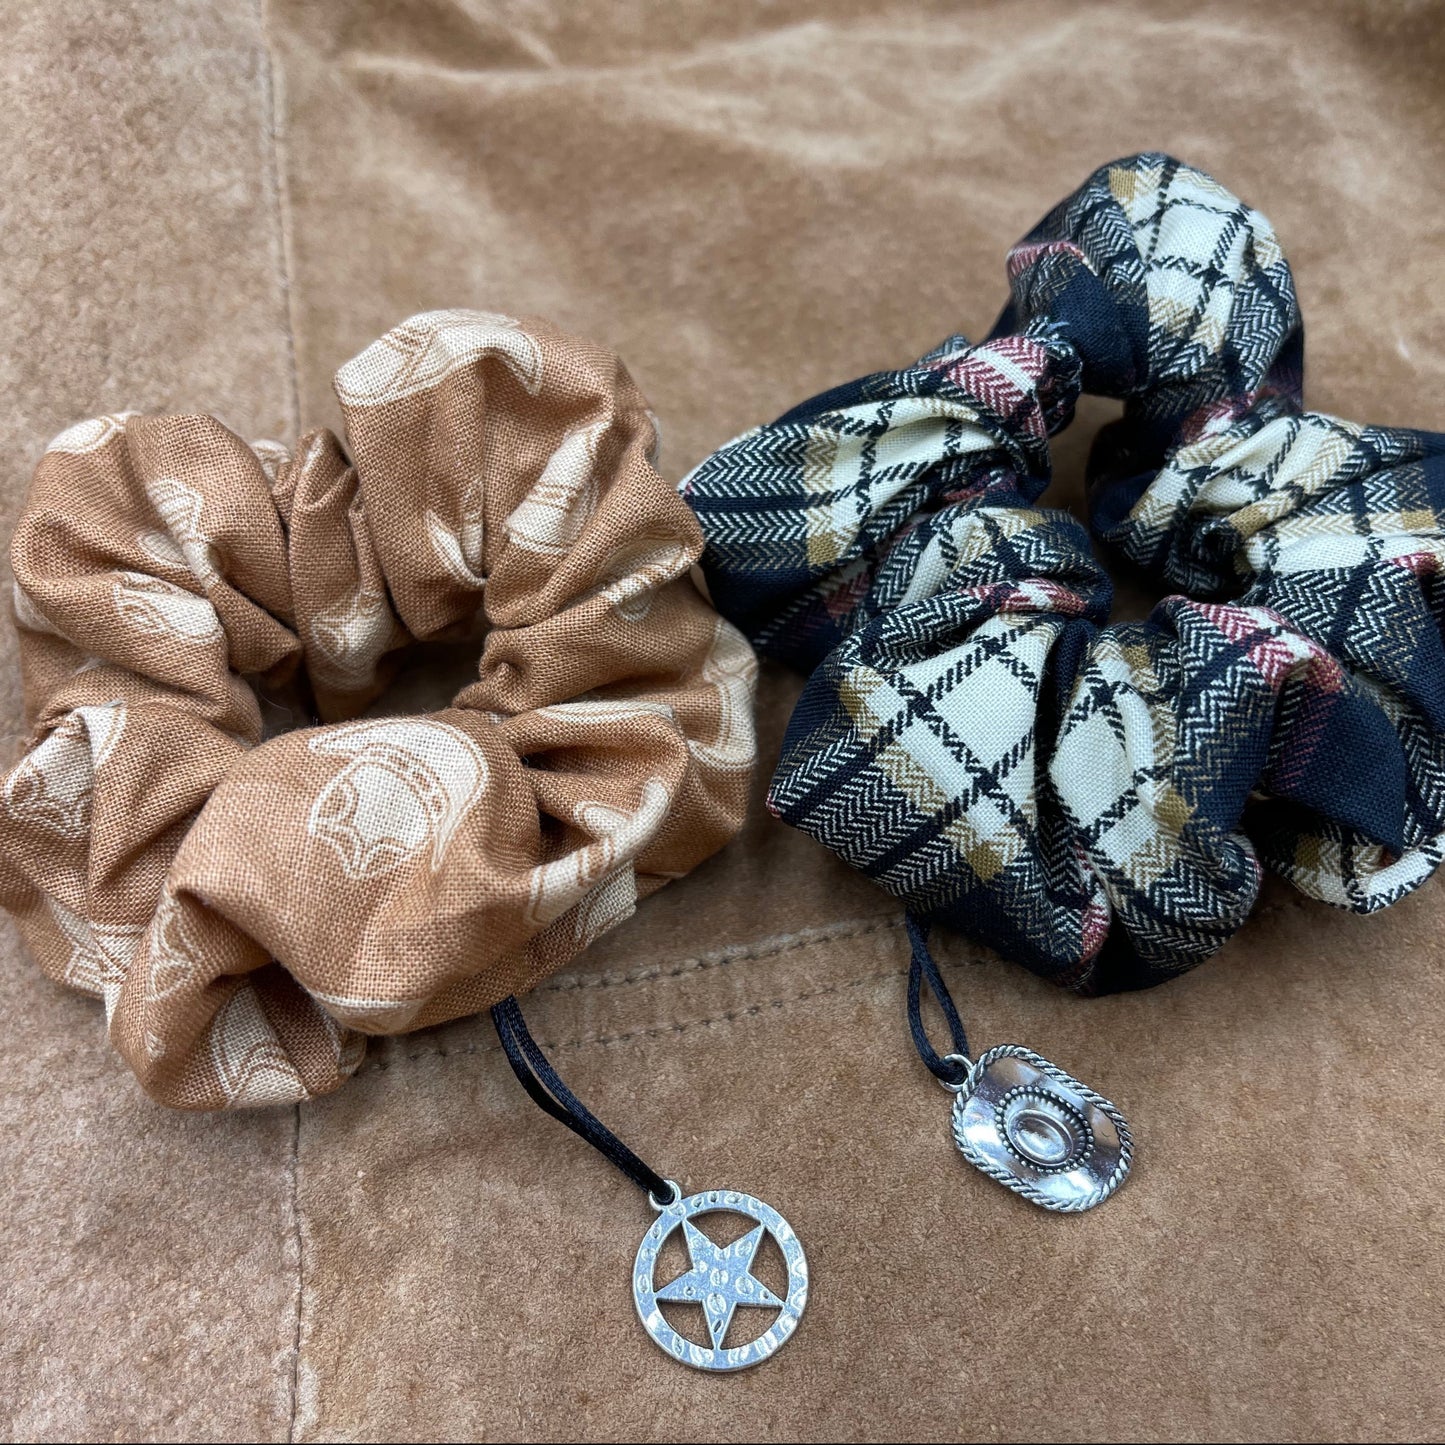 Two scrunchies side by side against a brown leather jacket. The left scrunchie is light brown with a pattern a cowboy hats. A charm shaped like a sheriff's badge is attached to the fabric. The right scrunchie is a black, white, yellow, and red plaid. Attached to the fabric is a charm shaped like a sheriff's hat.